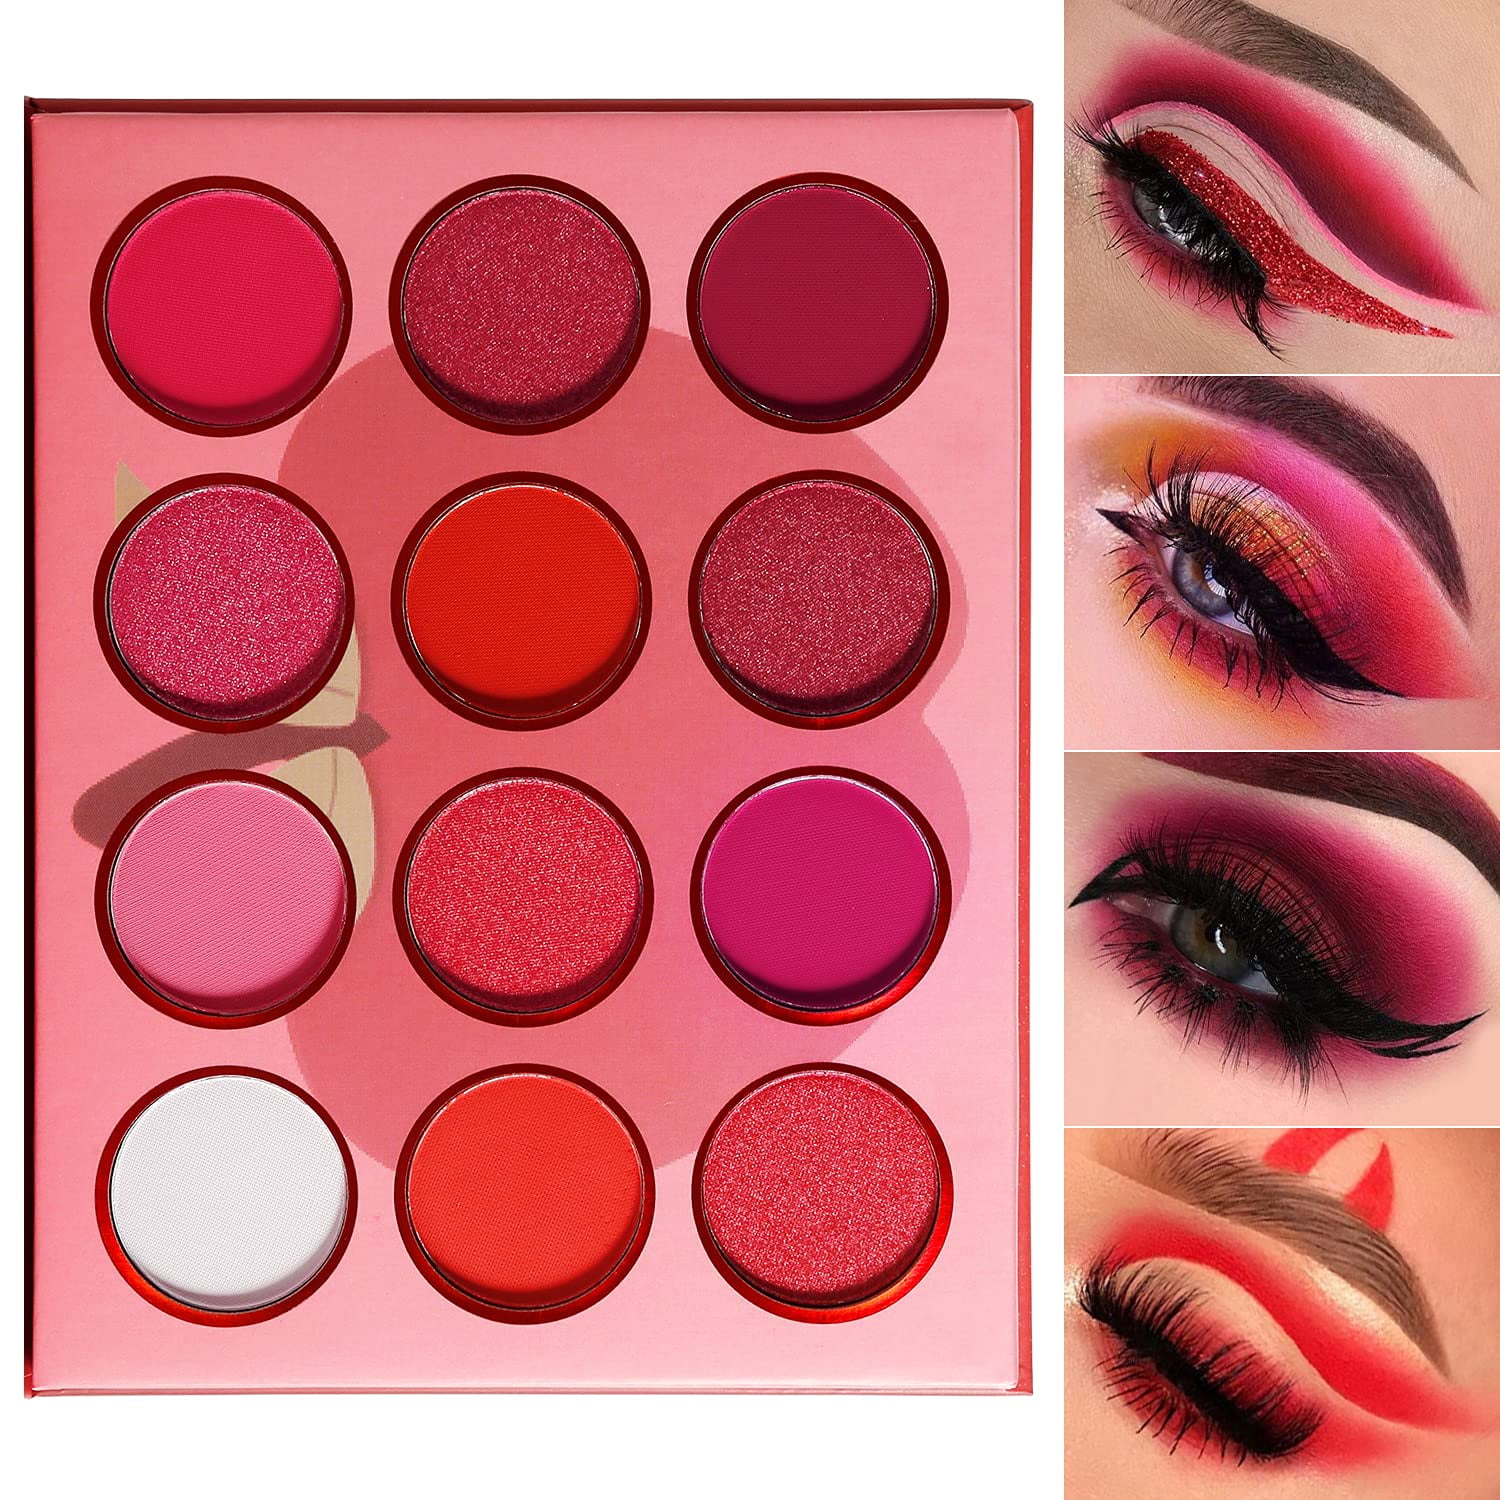 Professional Red Rose Pink Eyeshadow Palette Highly Pigmented, DE'LANCI 12 Color Matte+Shimmer Shadow Makeup Set Cute Travel Size, Blendable & Long Lasting Shade for Christmas Gifts Walmart.com